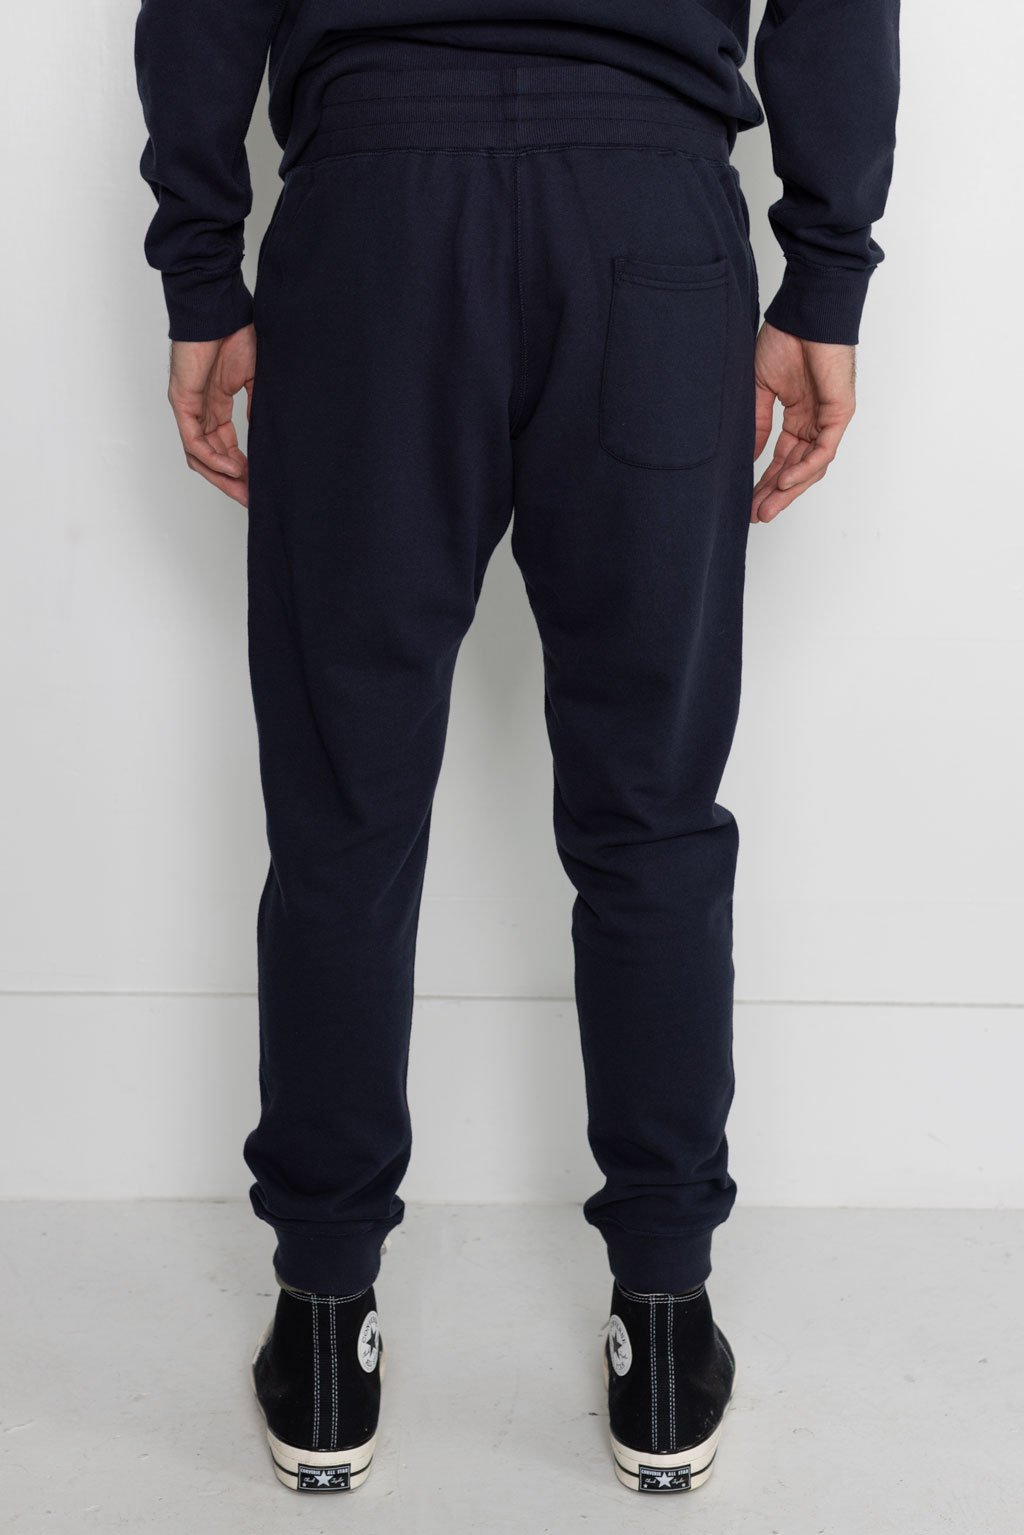 NS2167-2 250g French Terry Sweatpants in Navy 03